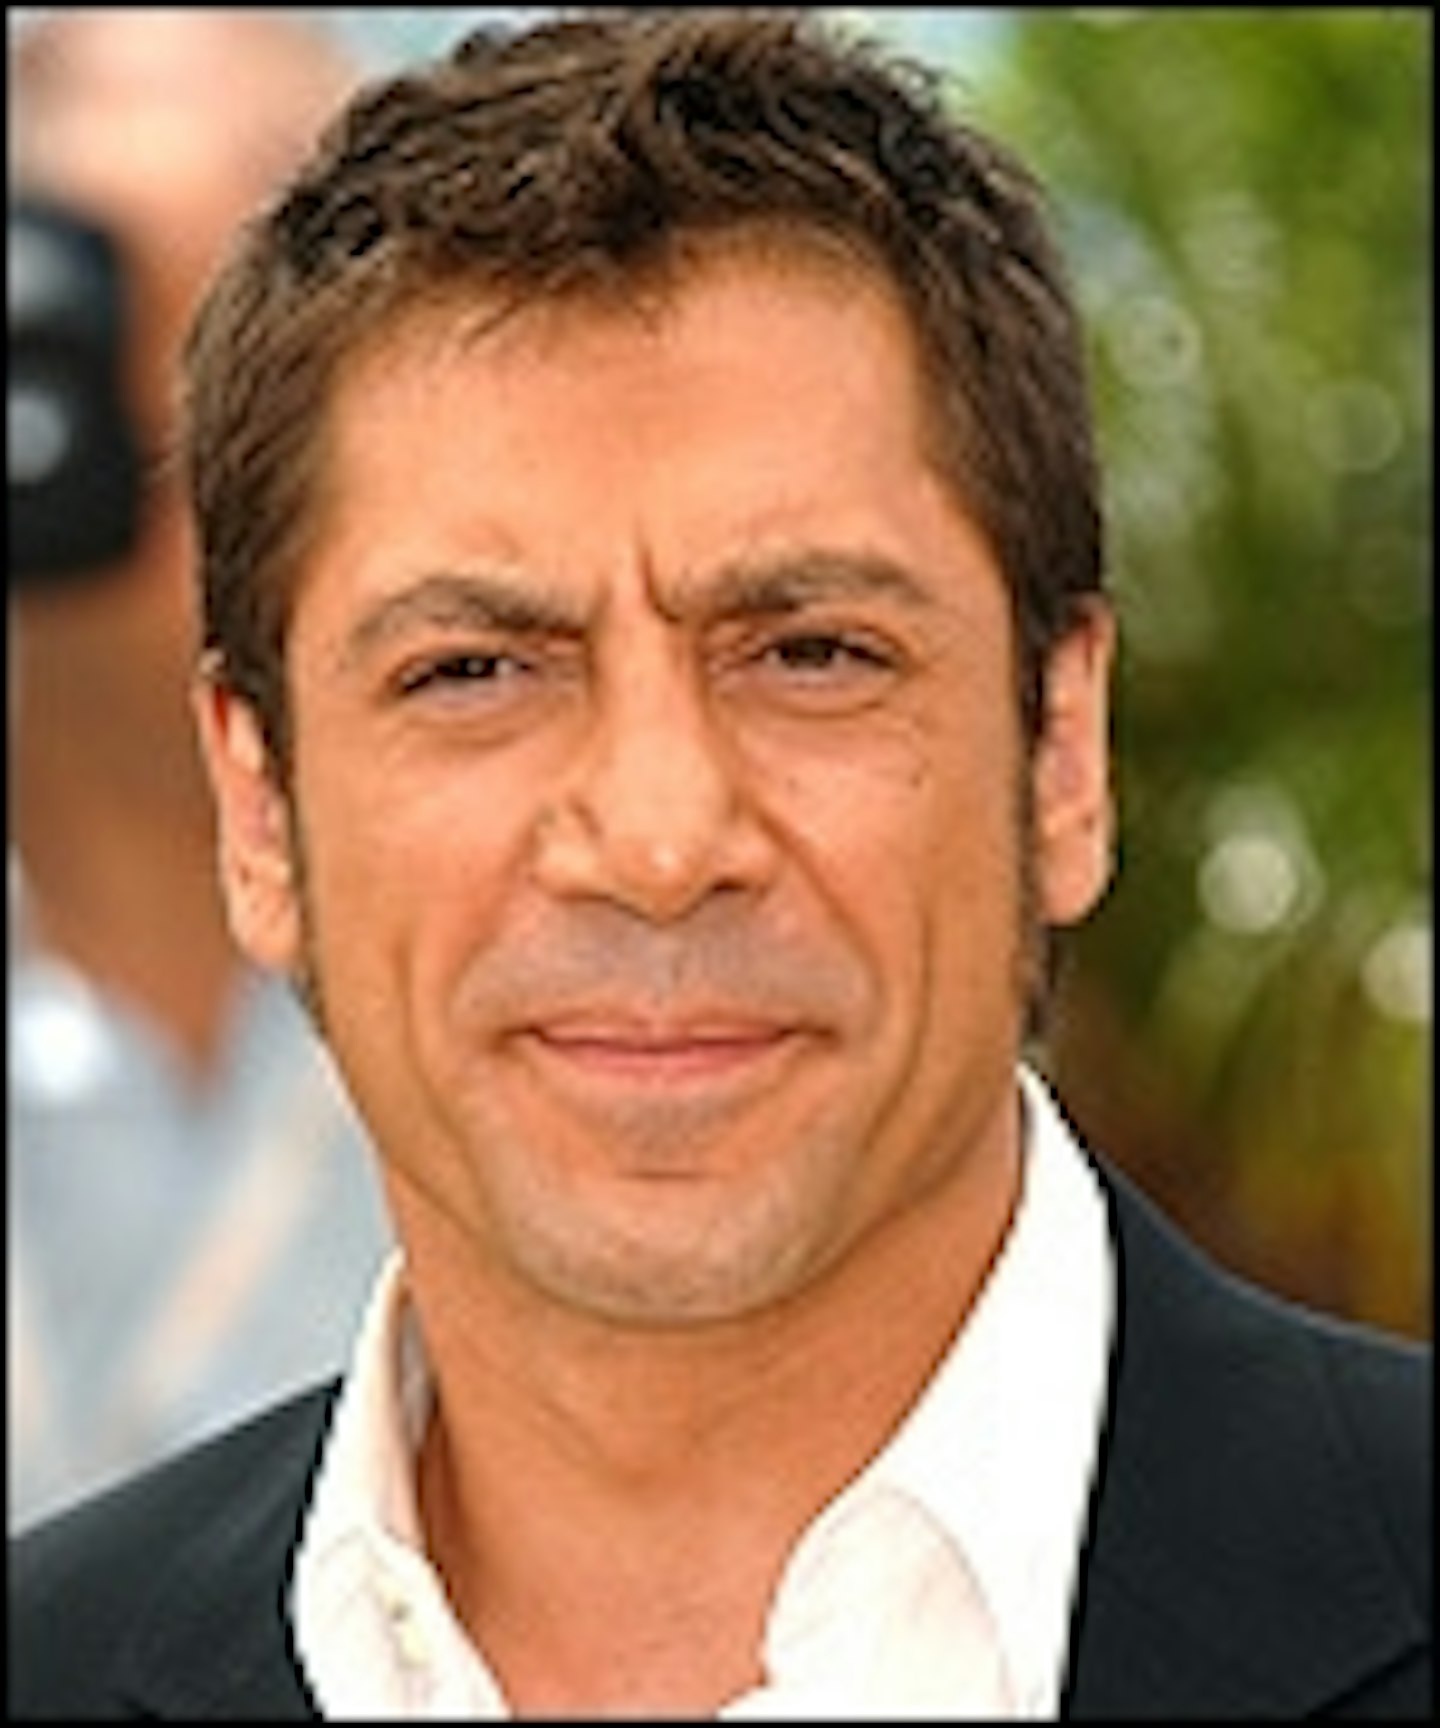 Javier Bardem In Talks For New Pirates Of The Caribbean